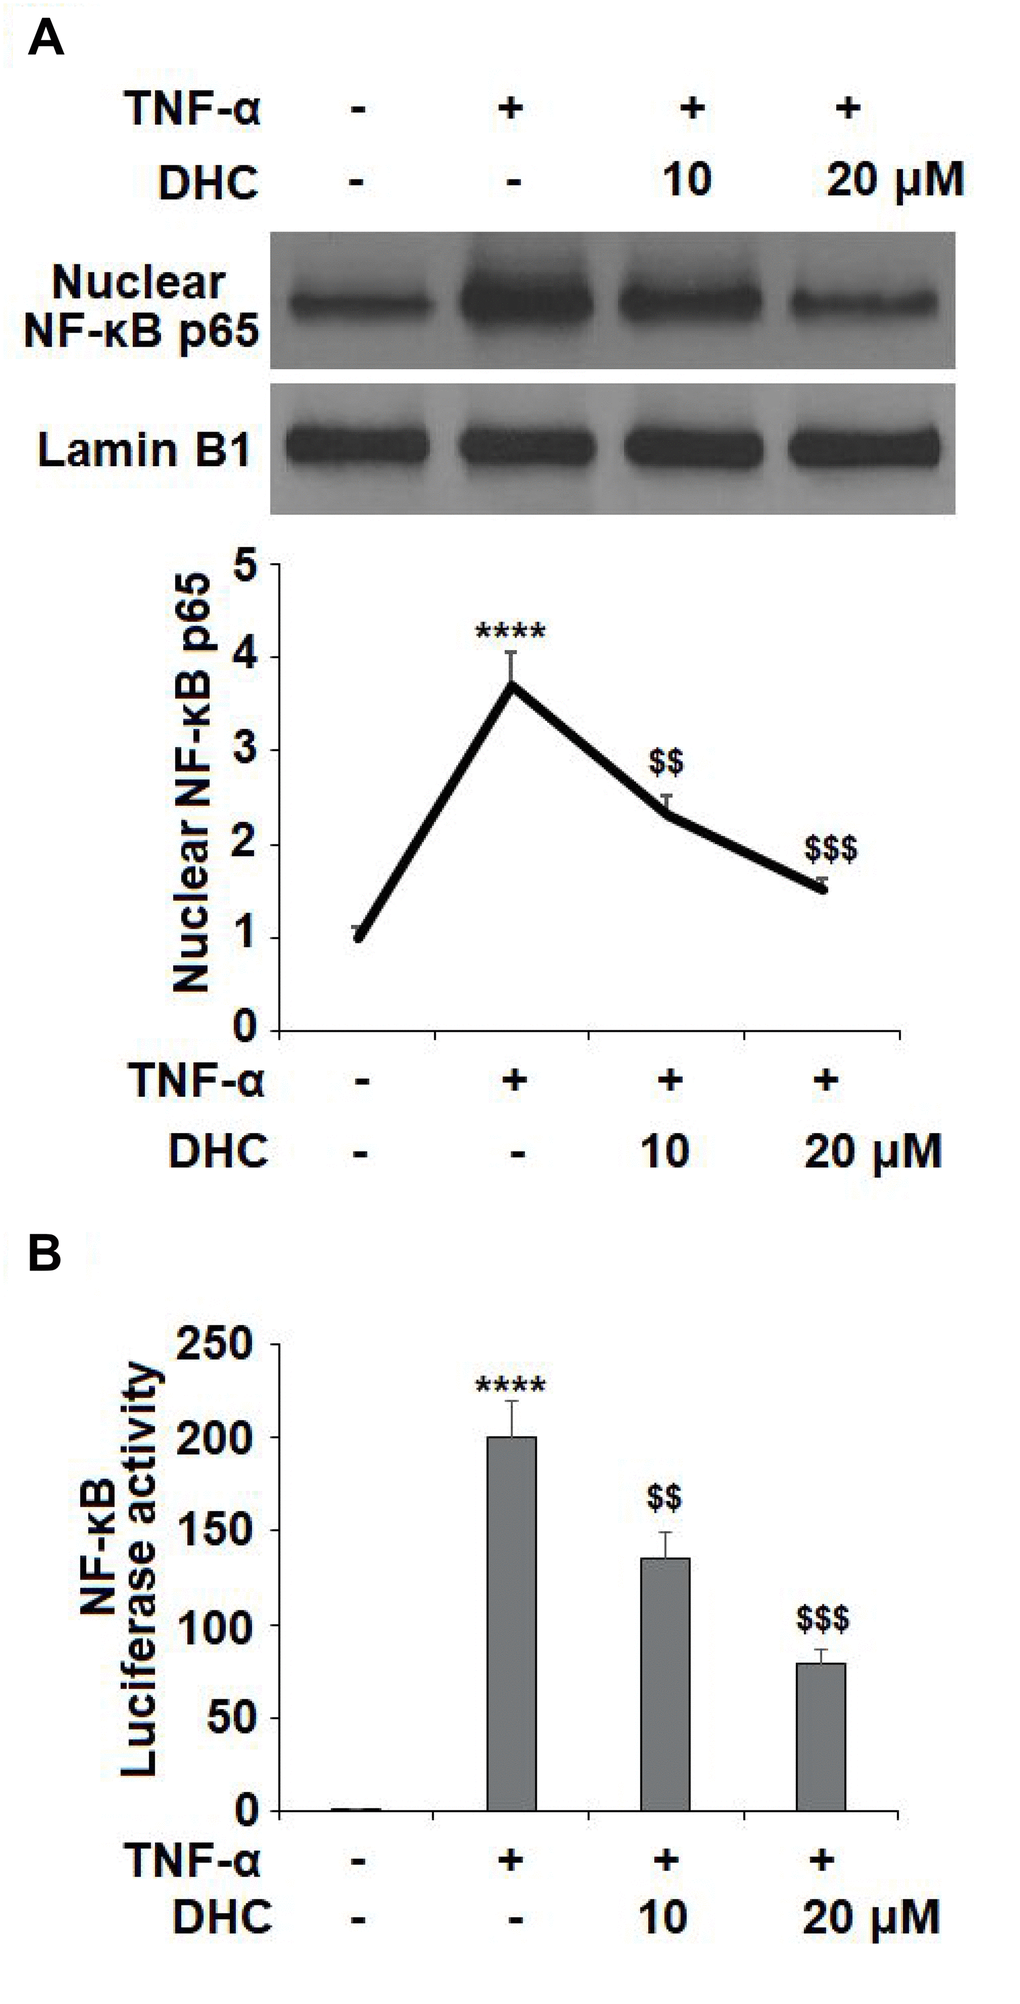 DHC prevented TNF-α- induced activation of NF-κB. Cells were stimulated with TNF-α (10 ng/ml) in the presence or absence of 10 and 20 μM for 24 h. (A). Nuclear levels of NF-κB p65; (B). Luciferase activity of NF-κB (****, P